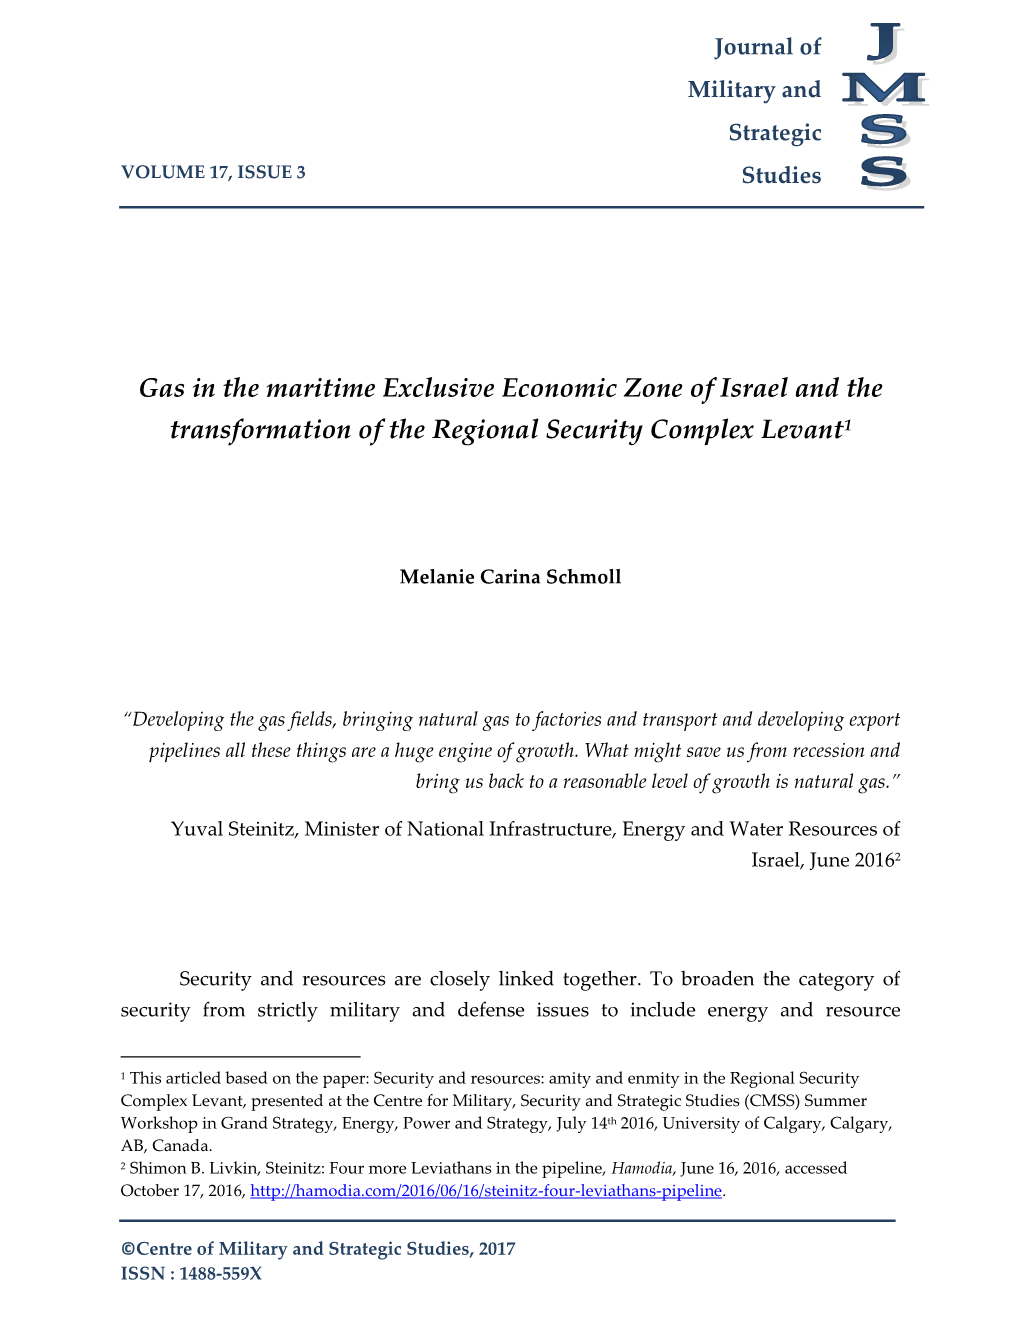 Gas in the Maritime Exclusive Economic Zone of Israel and the Transformation of the Regional Security Complex Levant1